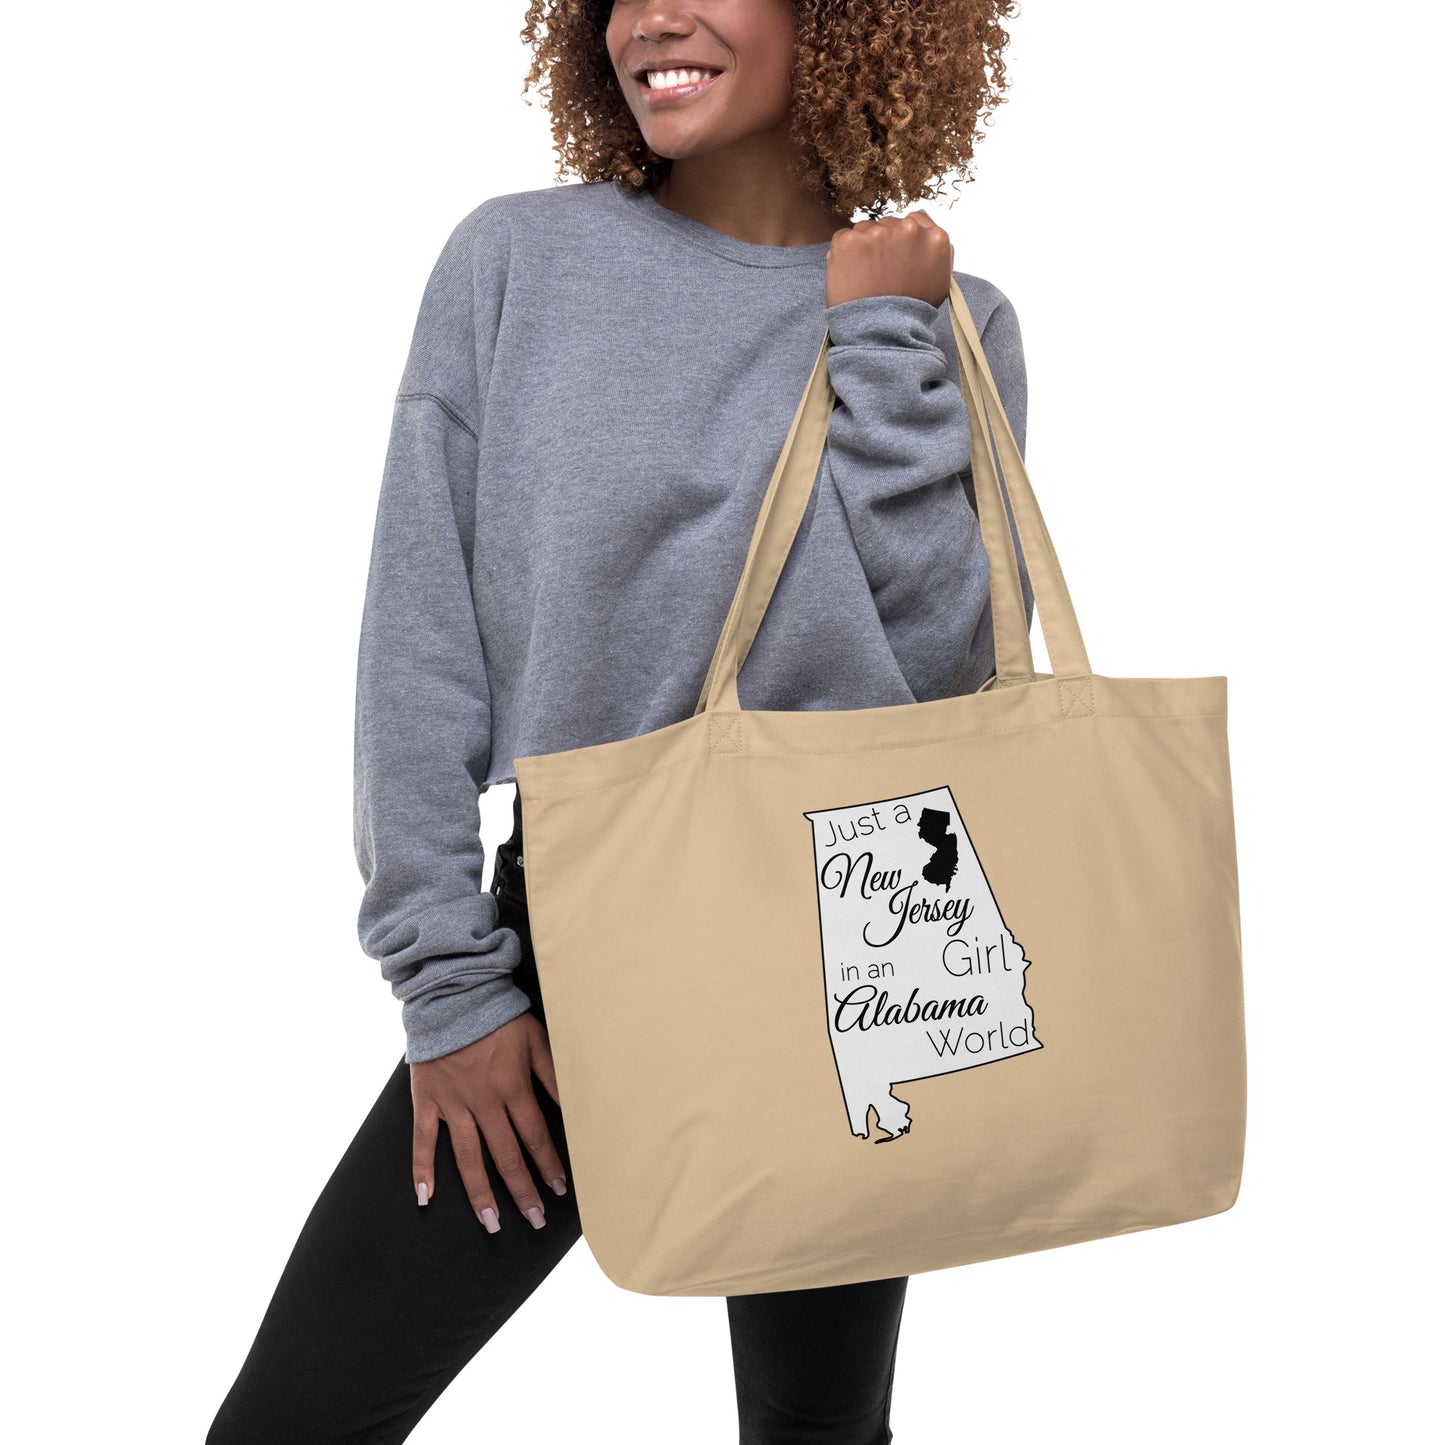 Just a New Jersey Girl in an Alabama World Large organic tote bag